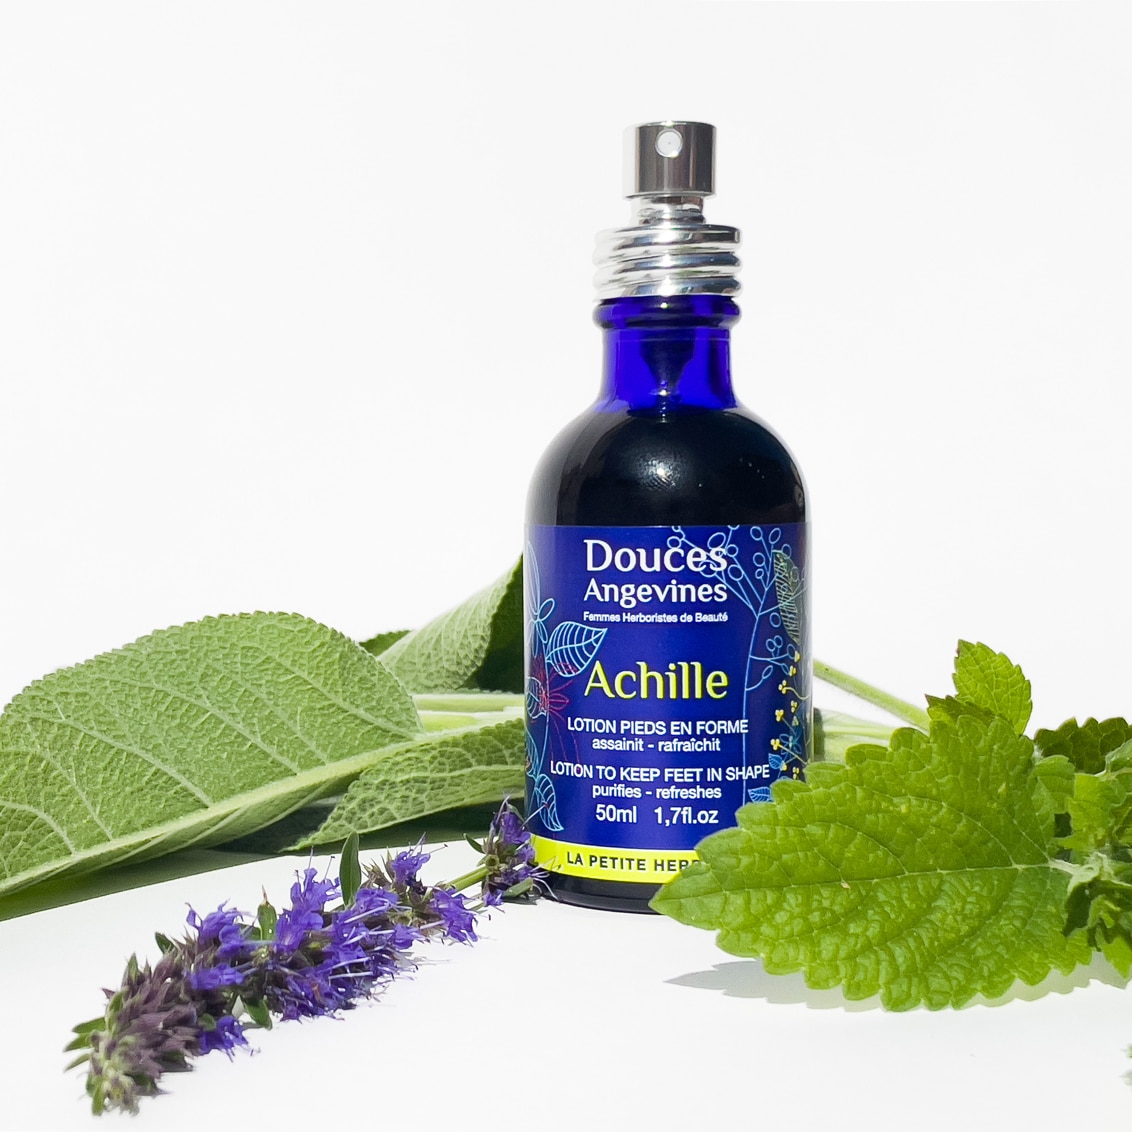 Achille organic foot lotion - Douces Angevines